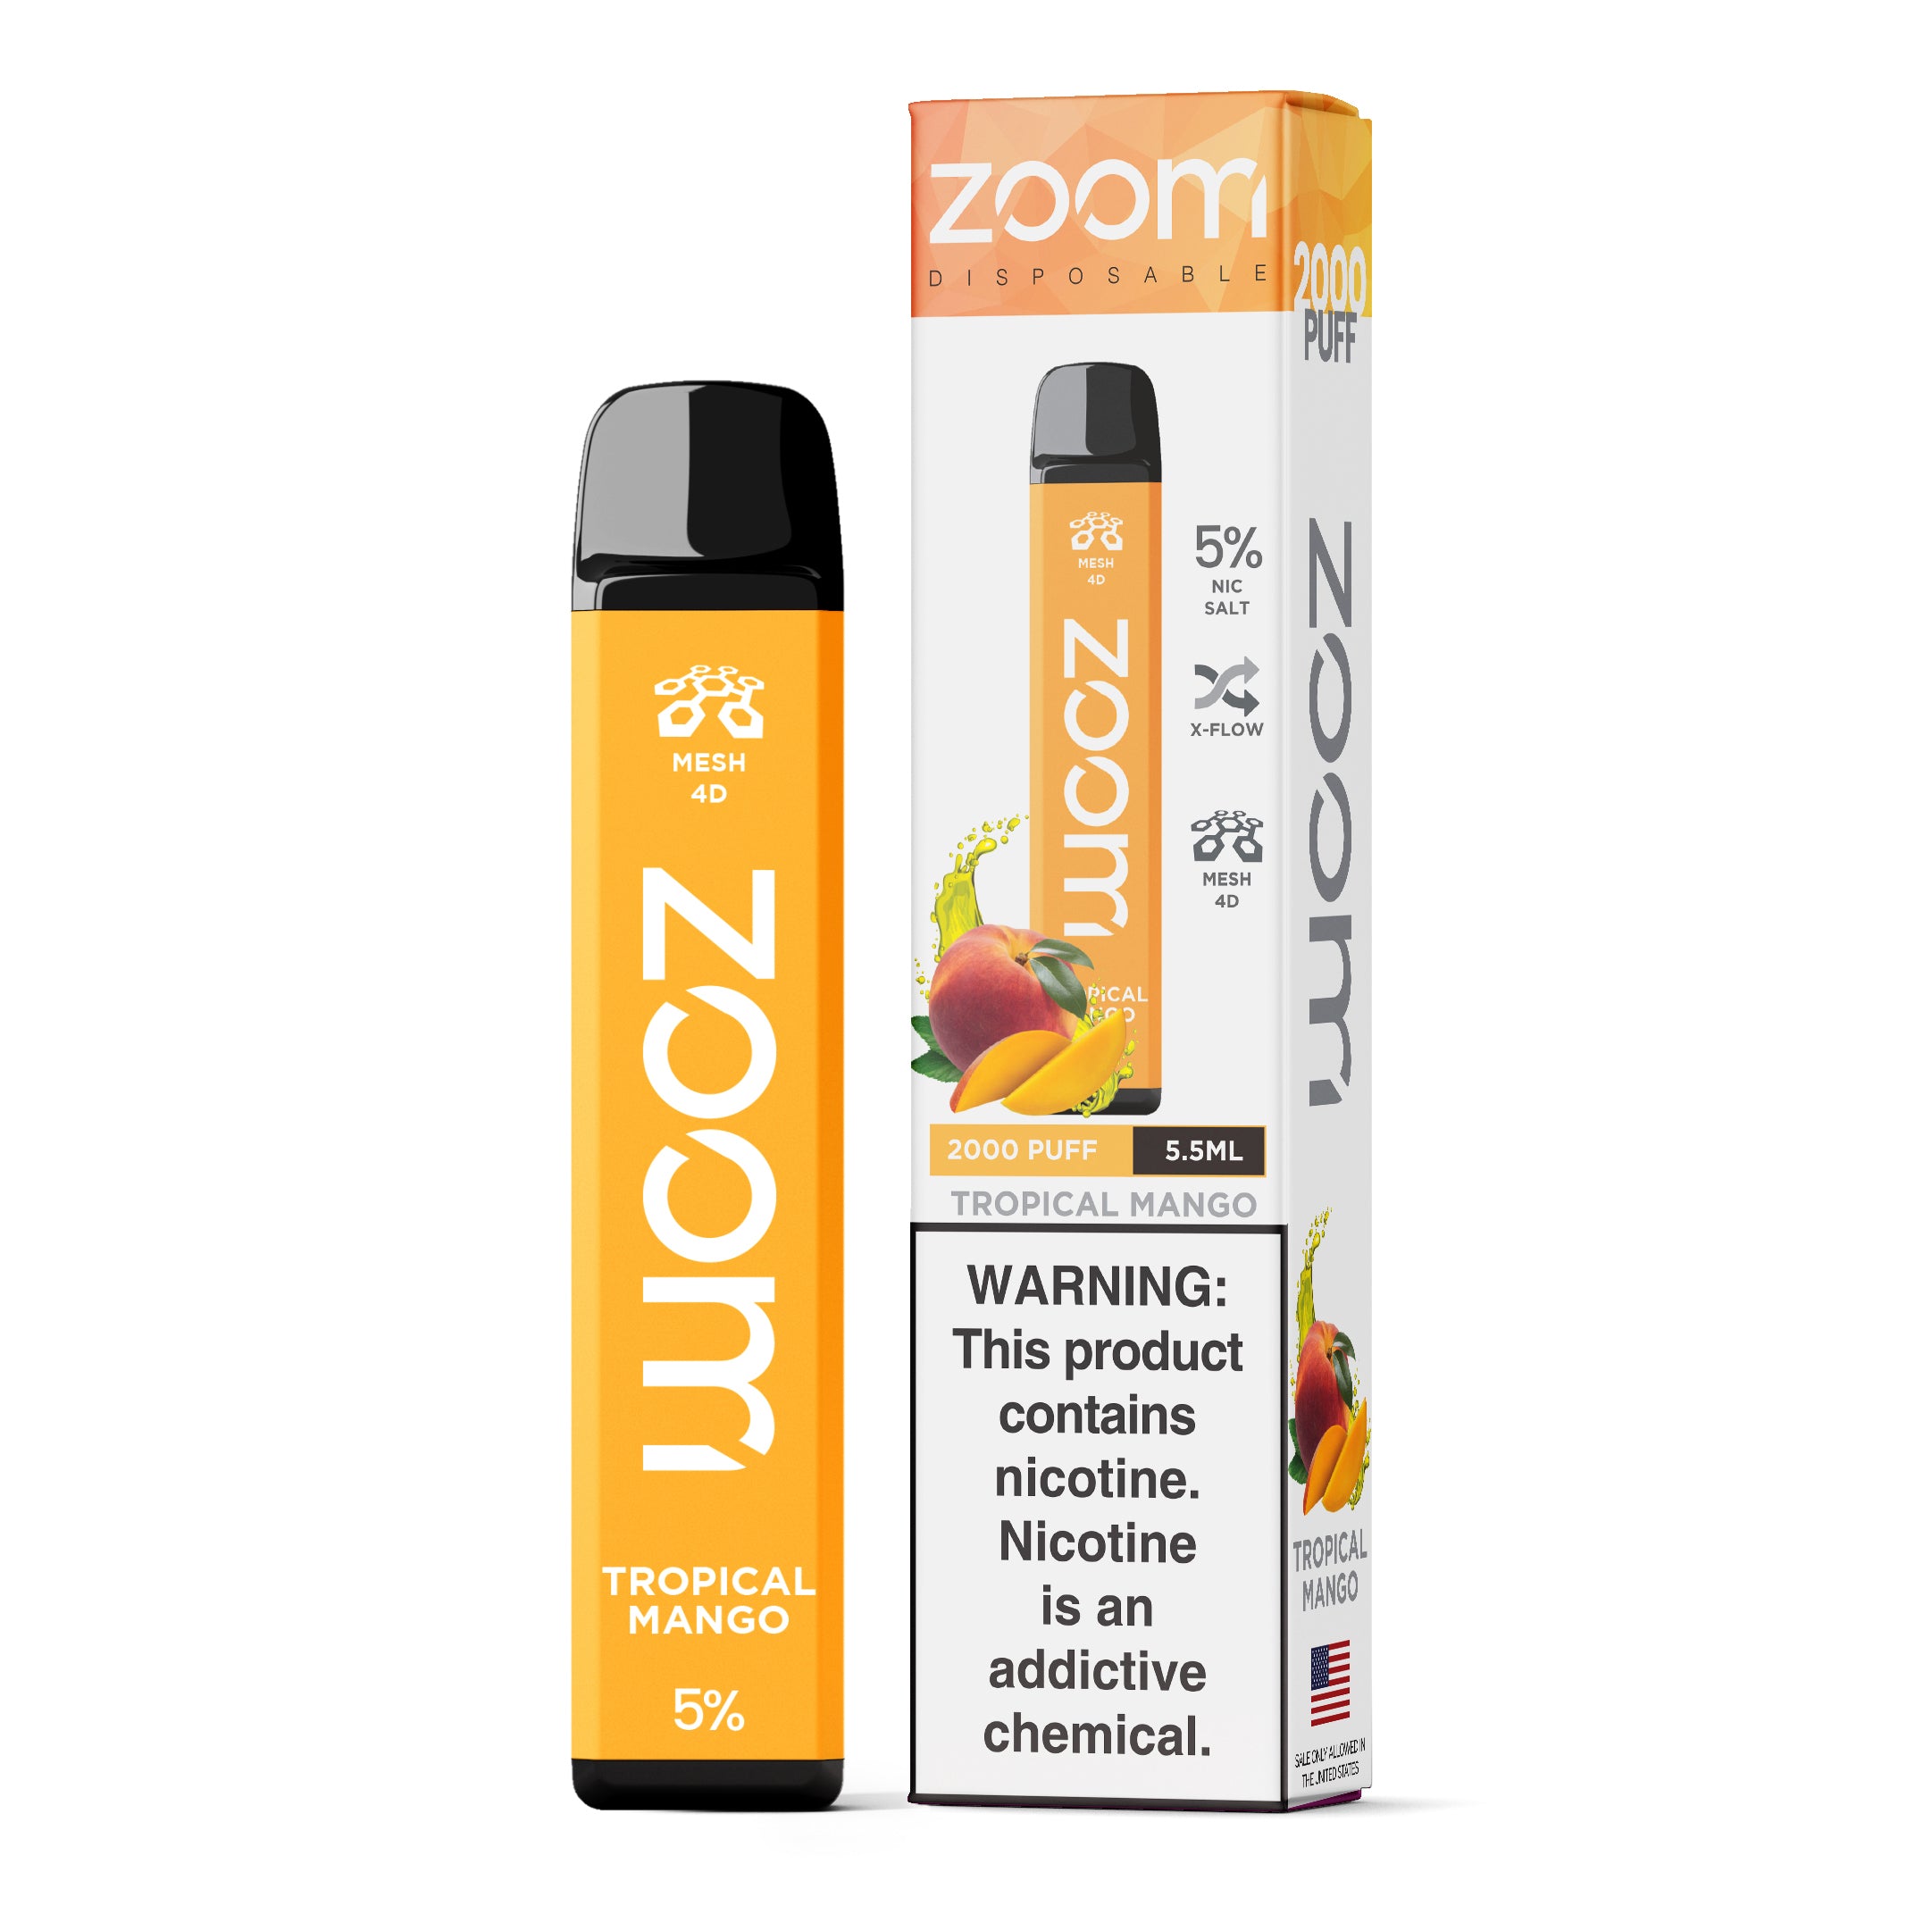 Zoom Disposable | 2000 Puffs | 5.5mL Tropical Mango with packaging